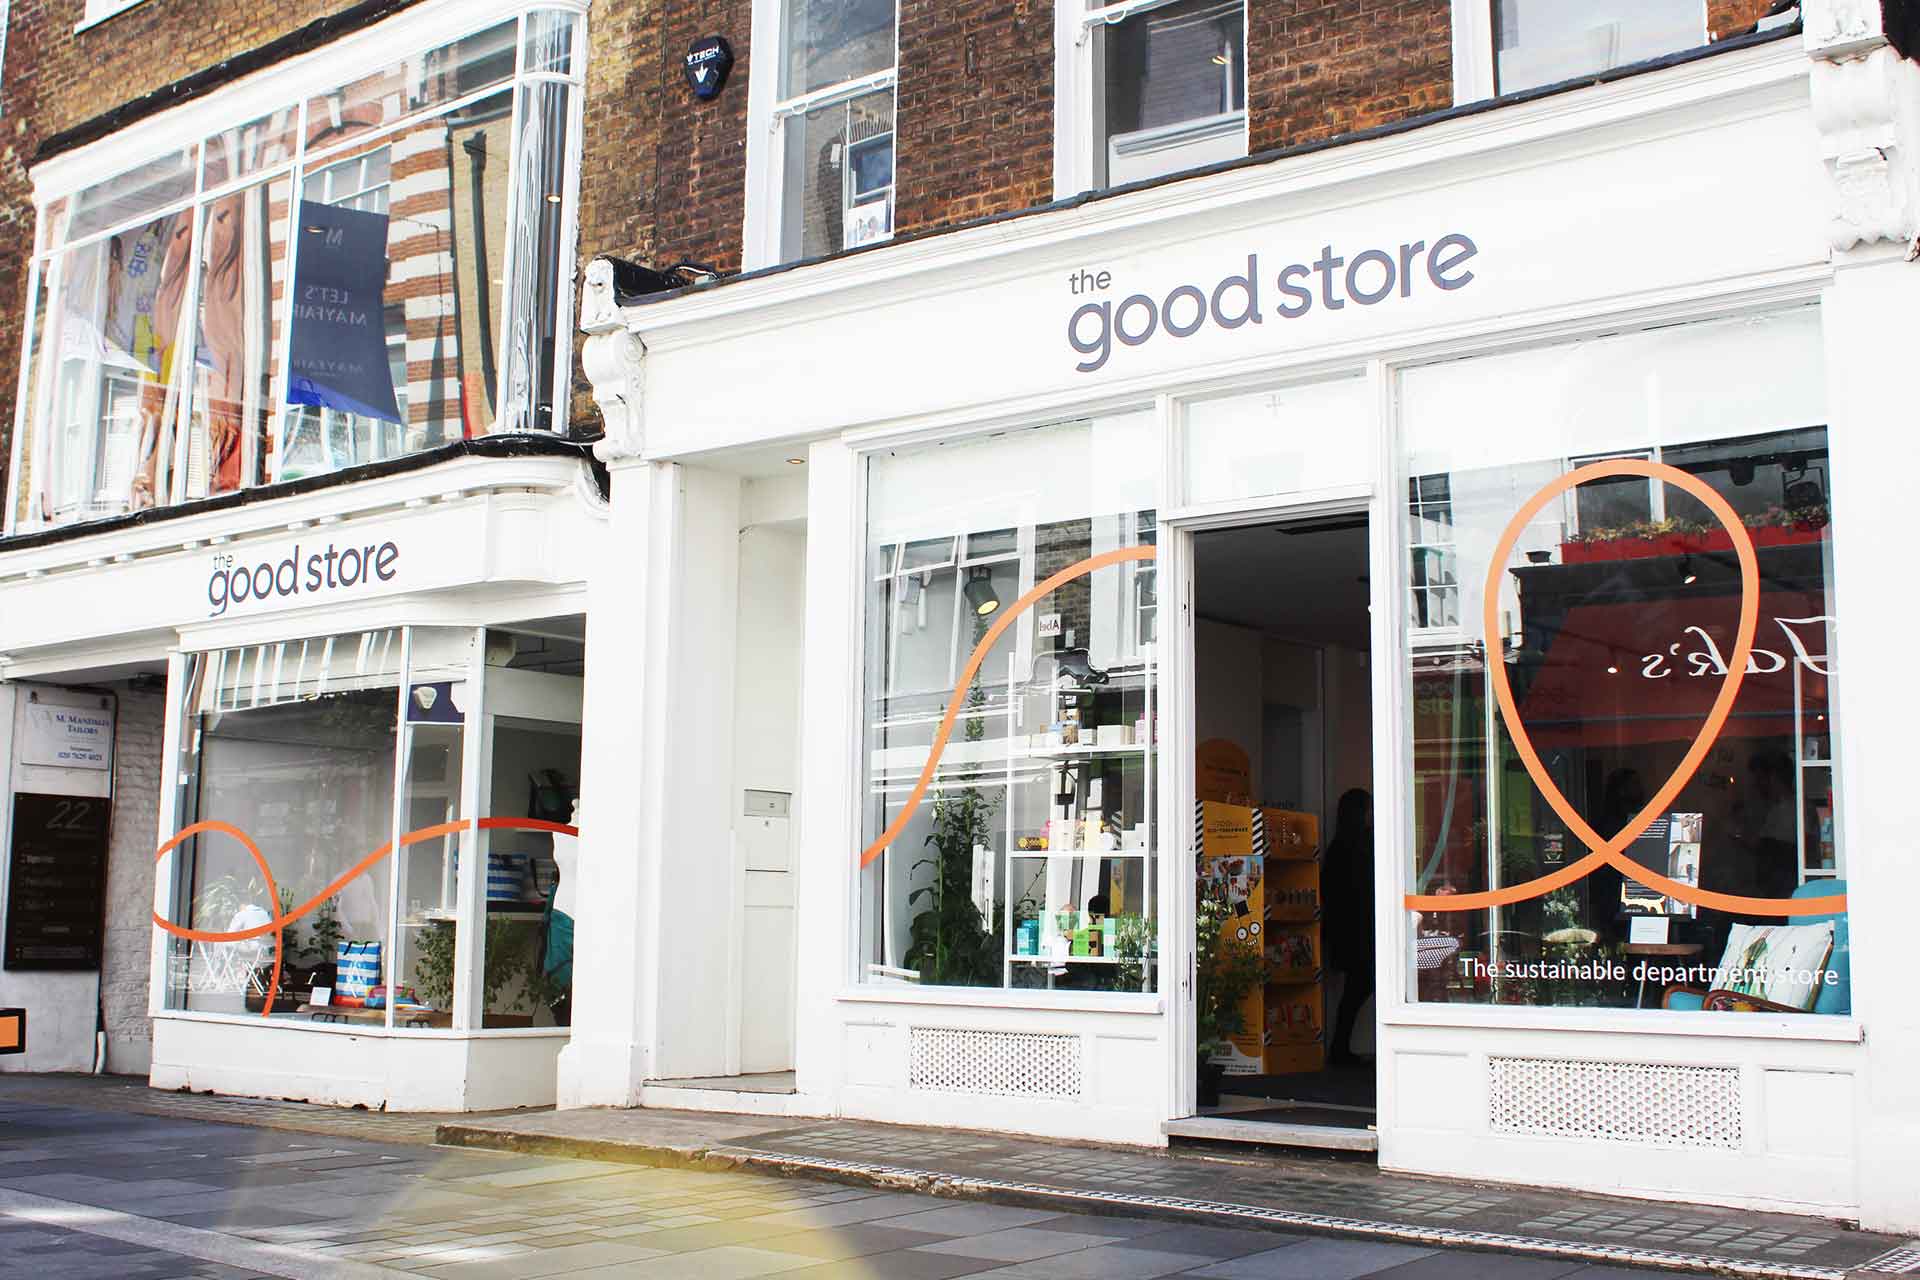 The Good Store